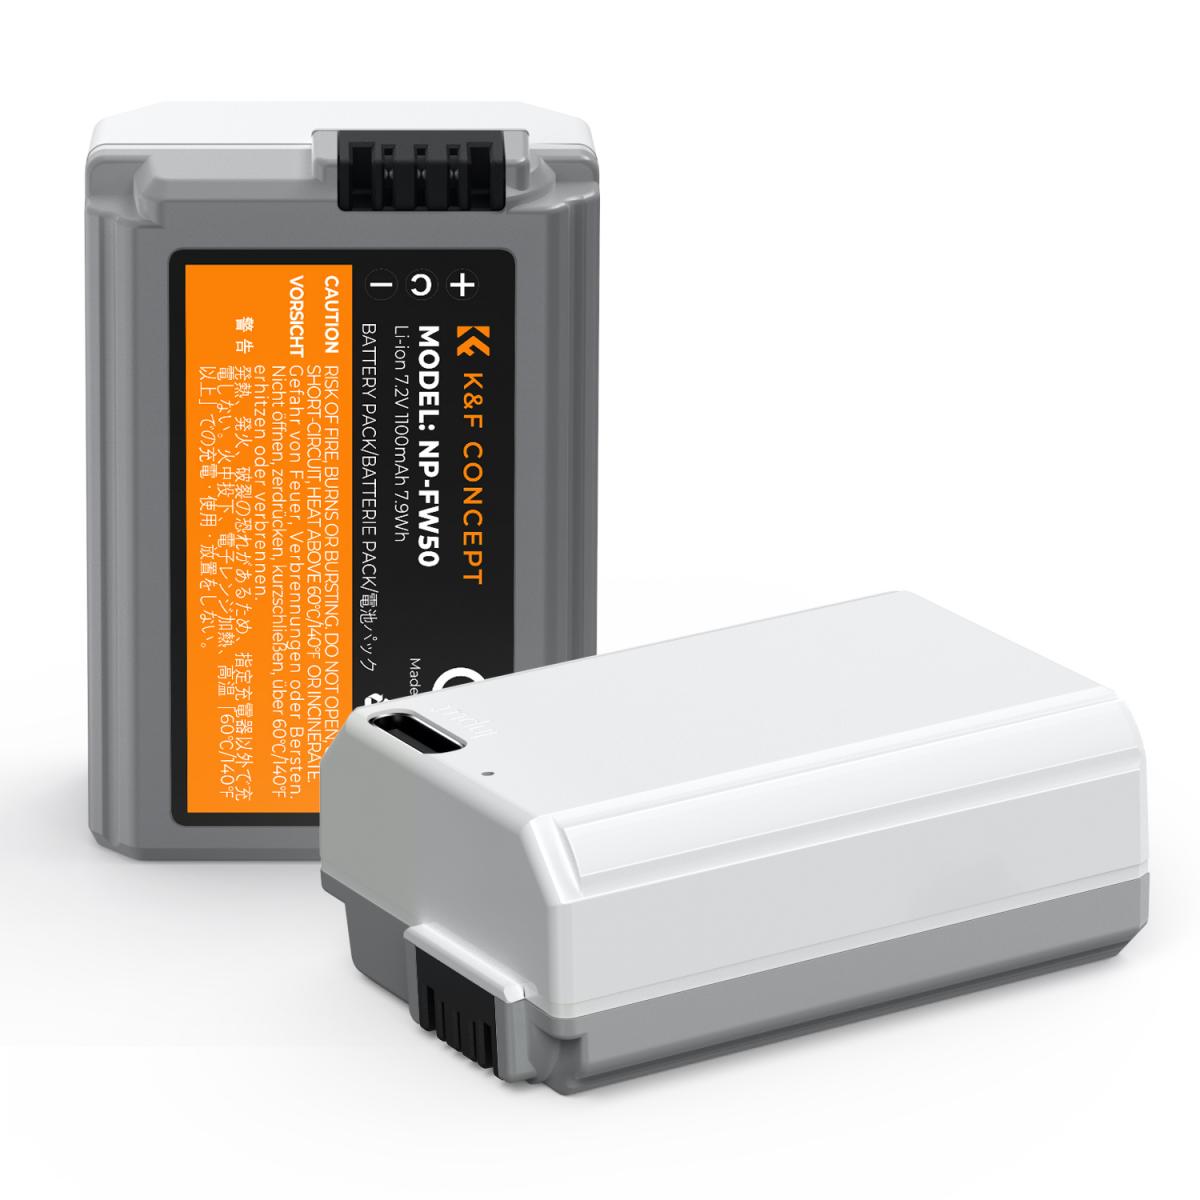 Sony NP-FW50 Battery with Type-C Fast Charging 2 battery